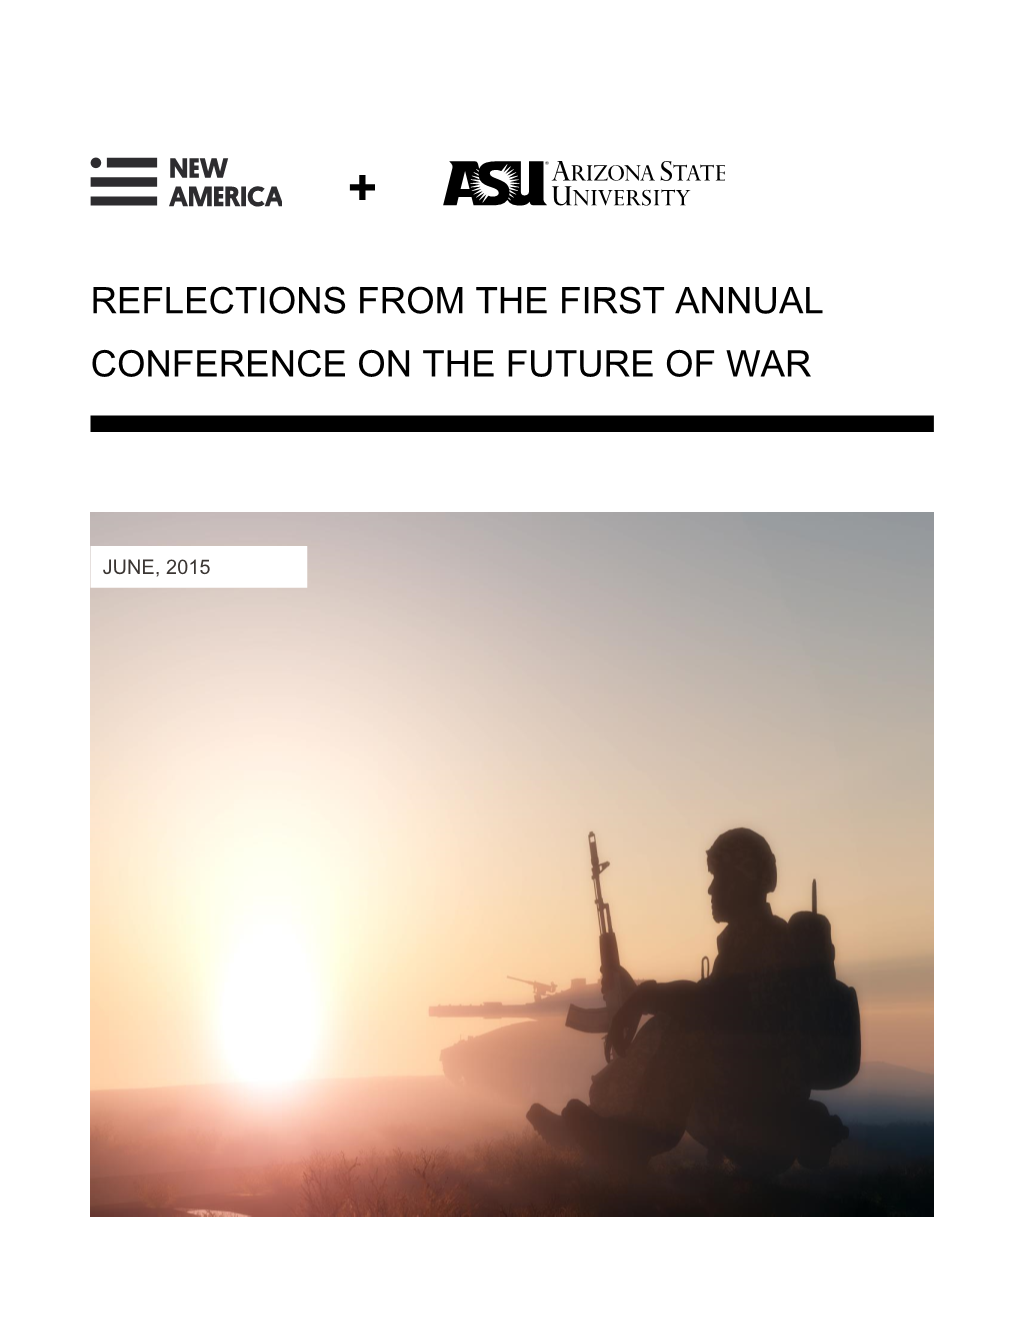 Reflections from the First Annual Conference on the Future of War